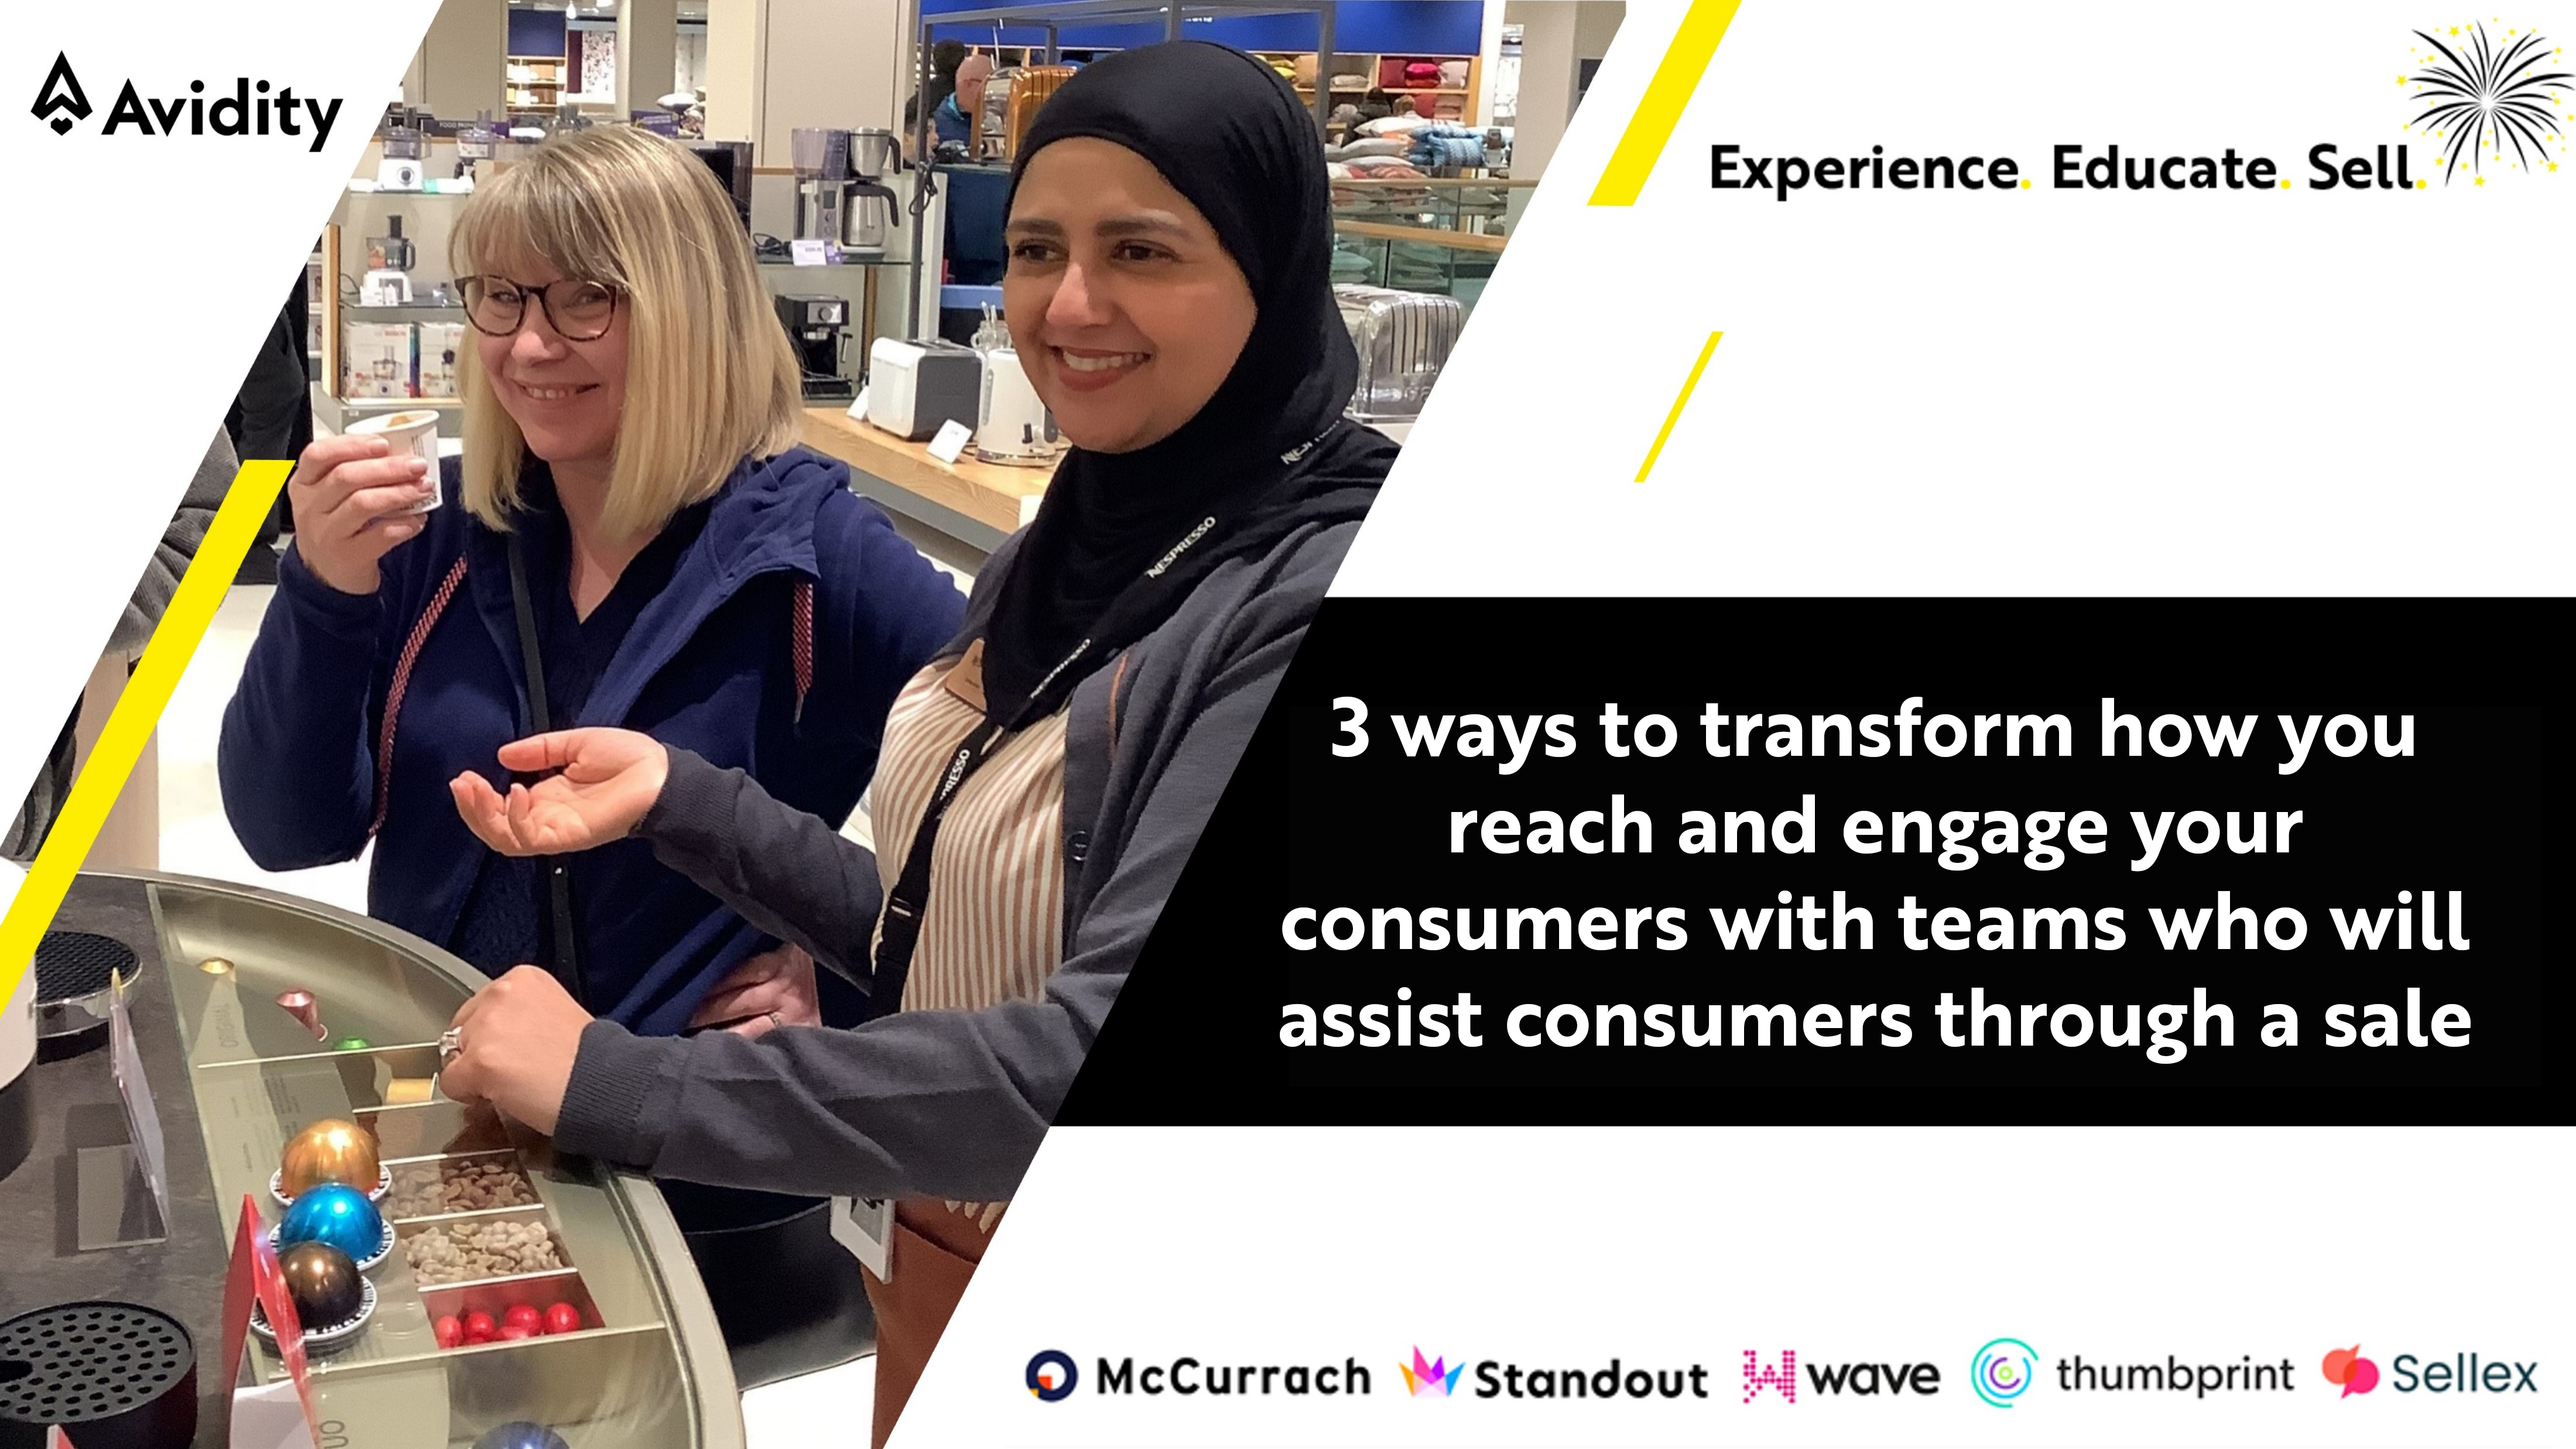 Experience. Educate. Sell:  3 ways to transform how you reach and engage your consumers with teams who will assist consumers through a sale